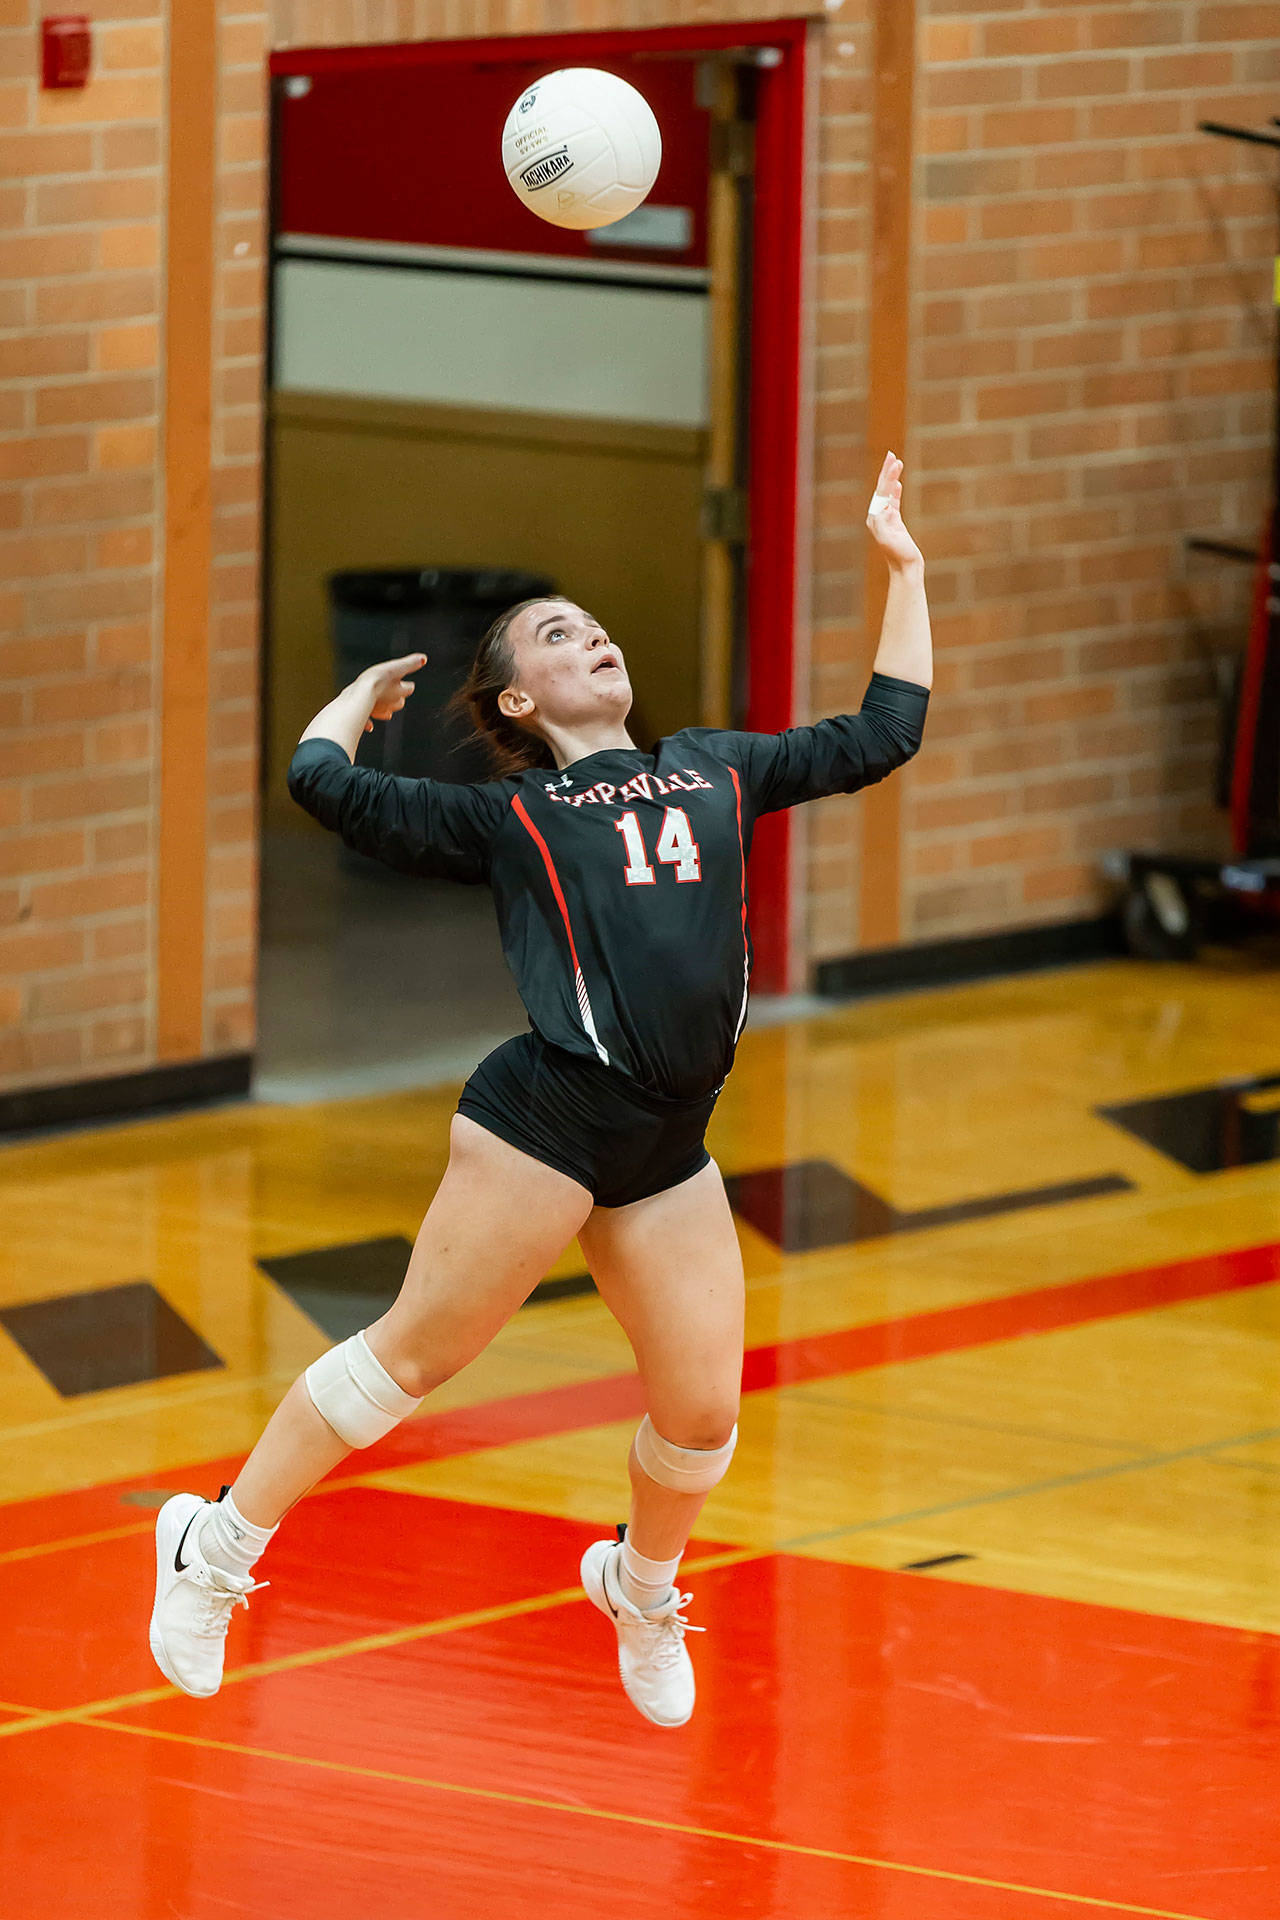 Ashley Menges launches a serve Wednesday.(Photo by John Fisken)